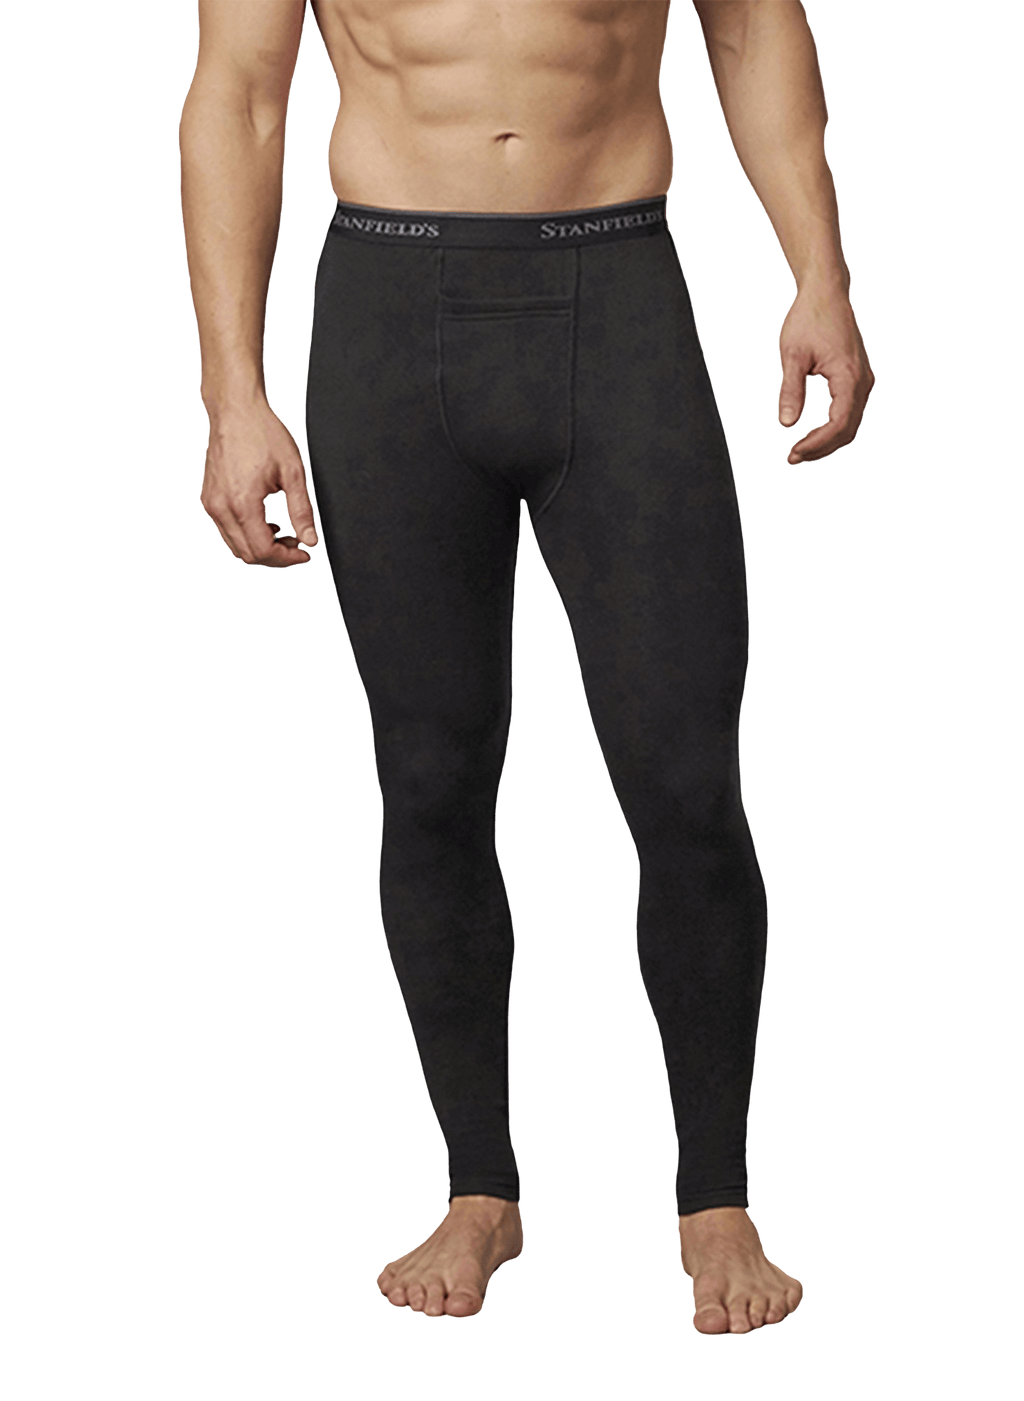 STANFIELD'S LIMITED MEN'S BLACK THERMAL UNDERWEAR/LONG JOHNS, SIZE S,  COTTON/POLYESTER, 210 G/SQ M - Thermal Underwear - NVT6622-572S